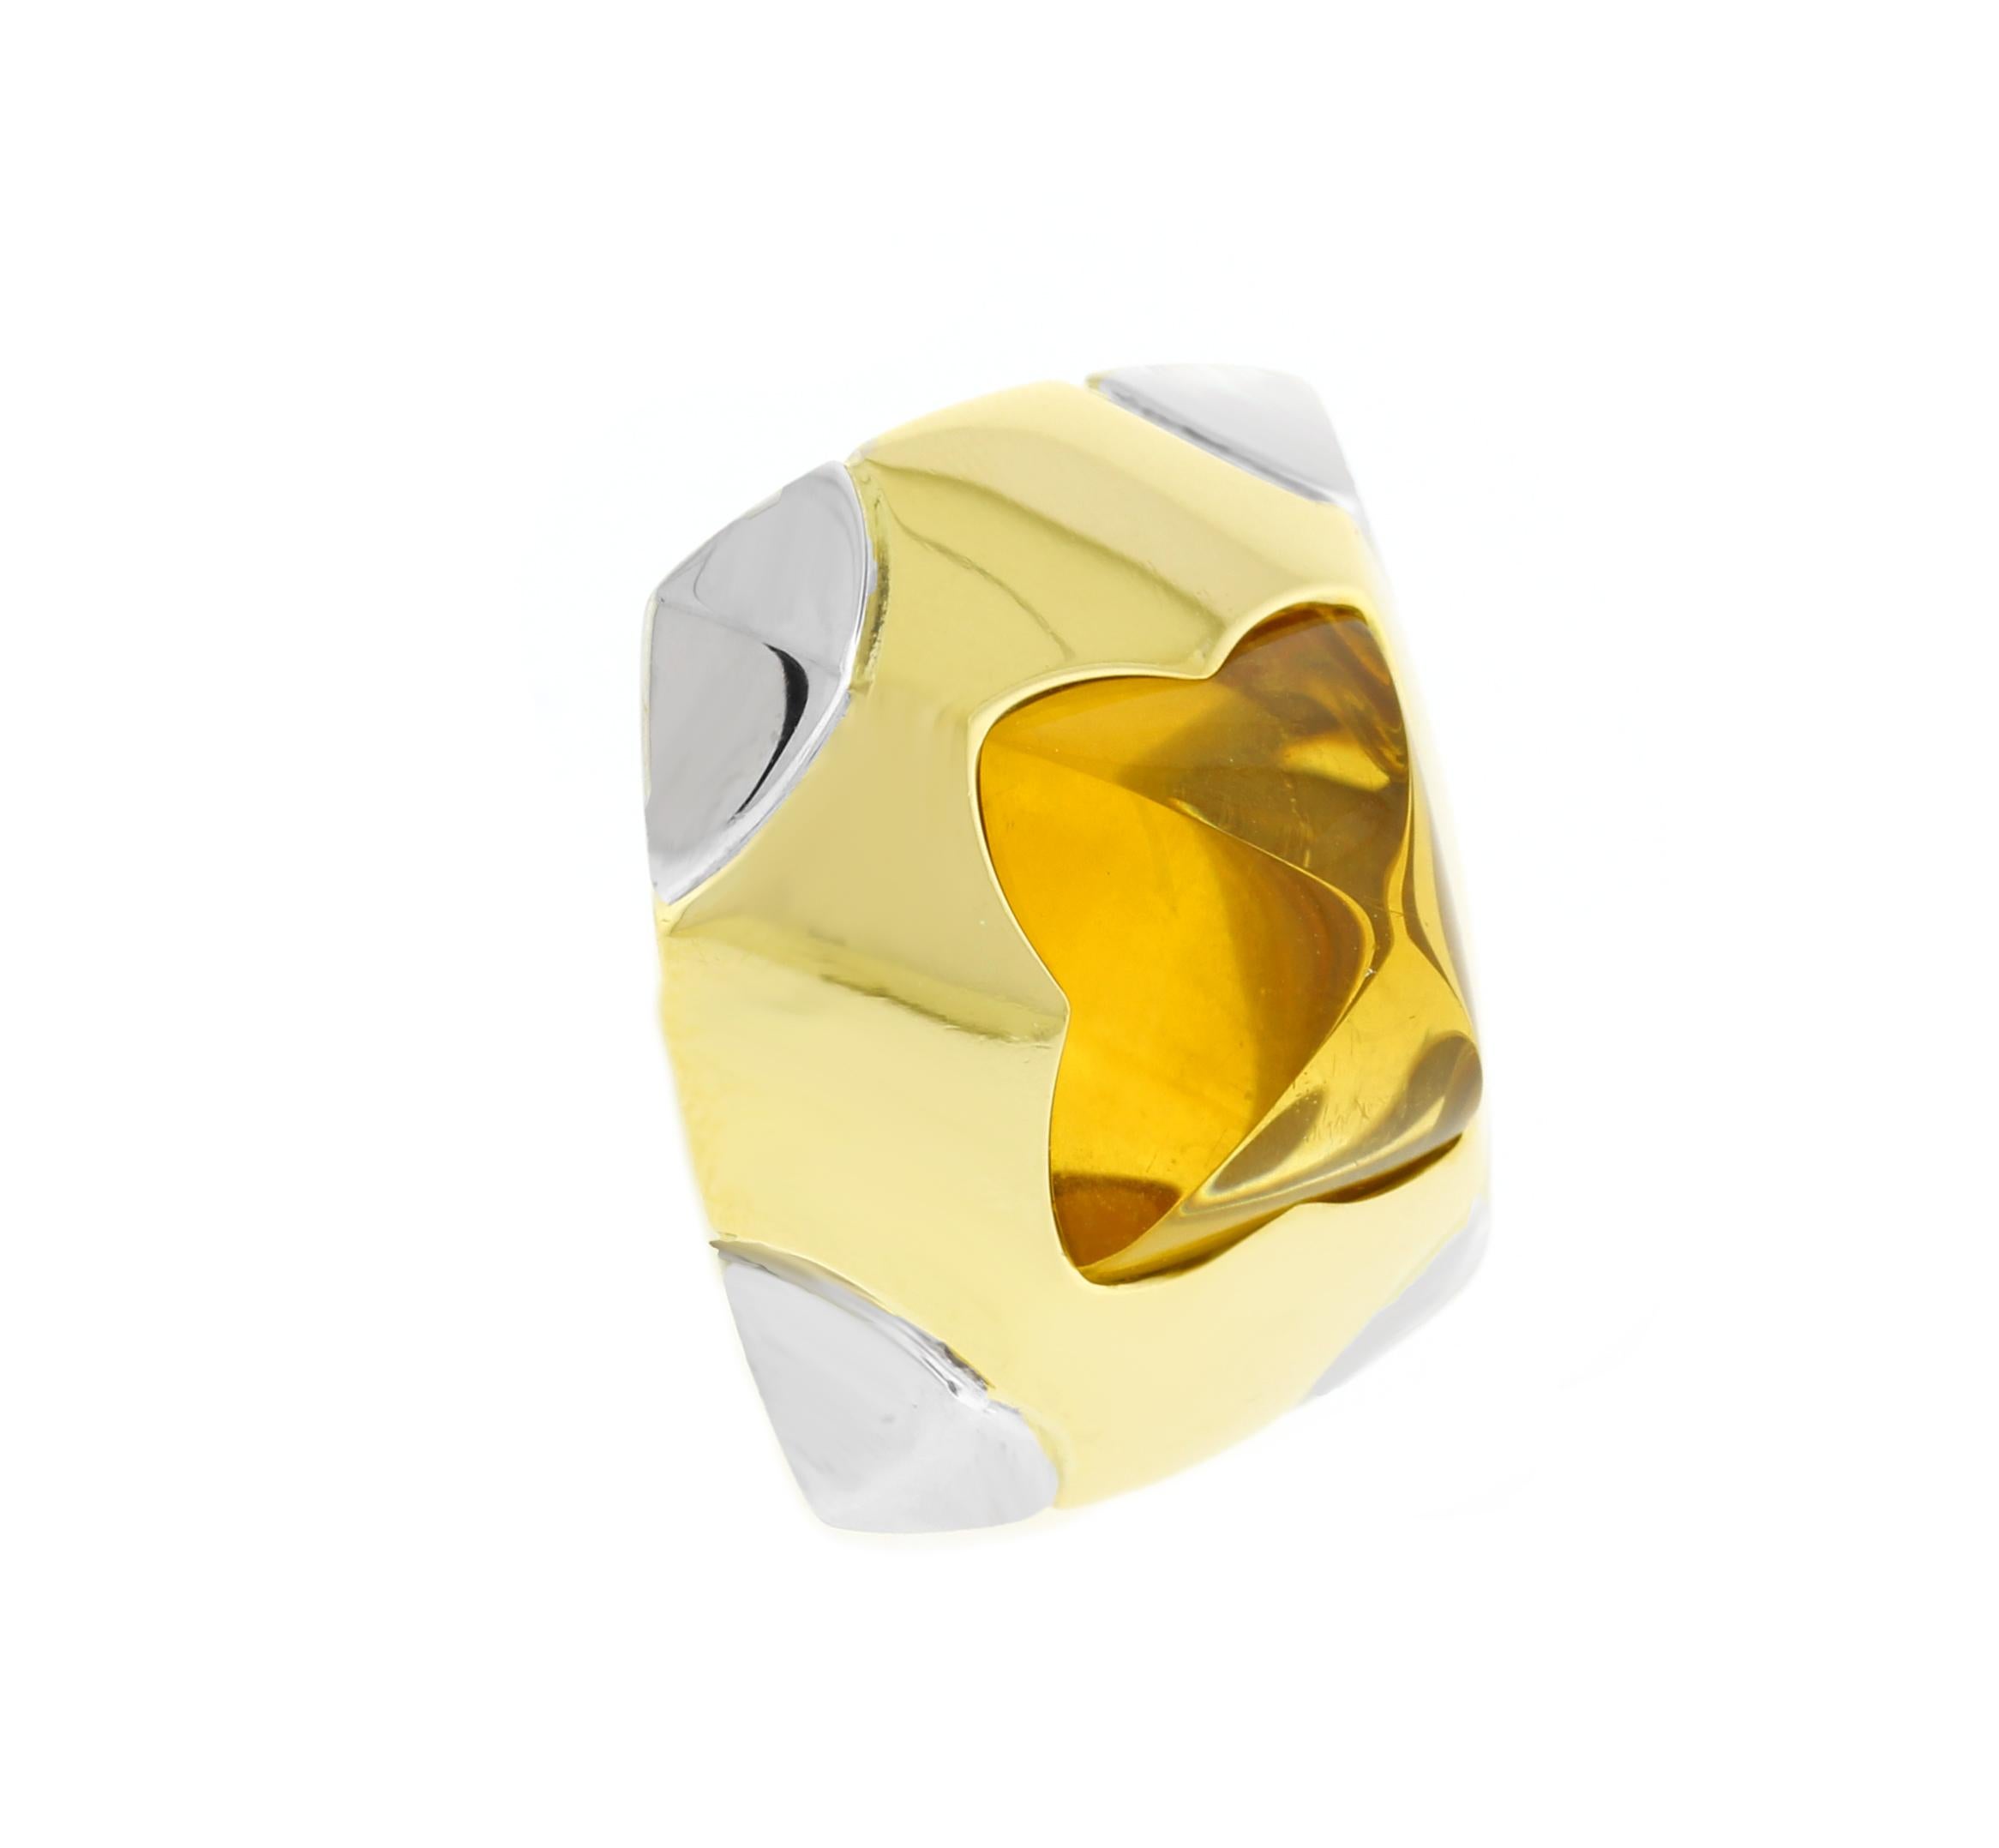 ♦ Designer: Bulgari
♦ Metal: 18 karat yellow gold and white gold
♦ Gemstone: Citrine
♦ Circa: 2010
♦ 1 inch square
♦ Packaging: Pampillonia presentation box
♦ Condition: Excellent , pre-owned